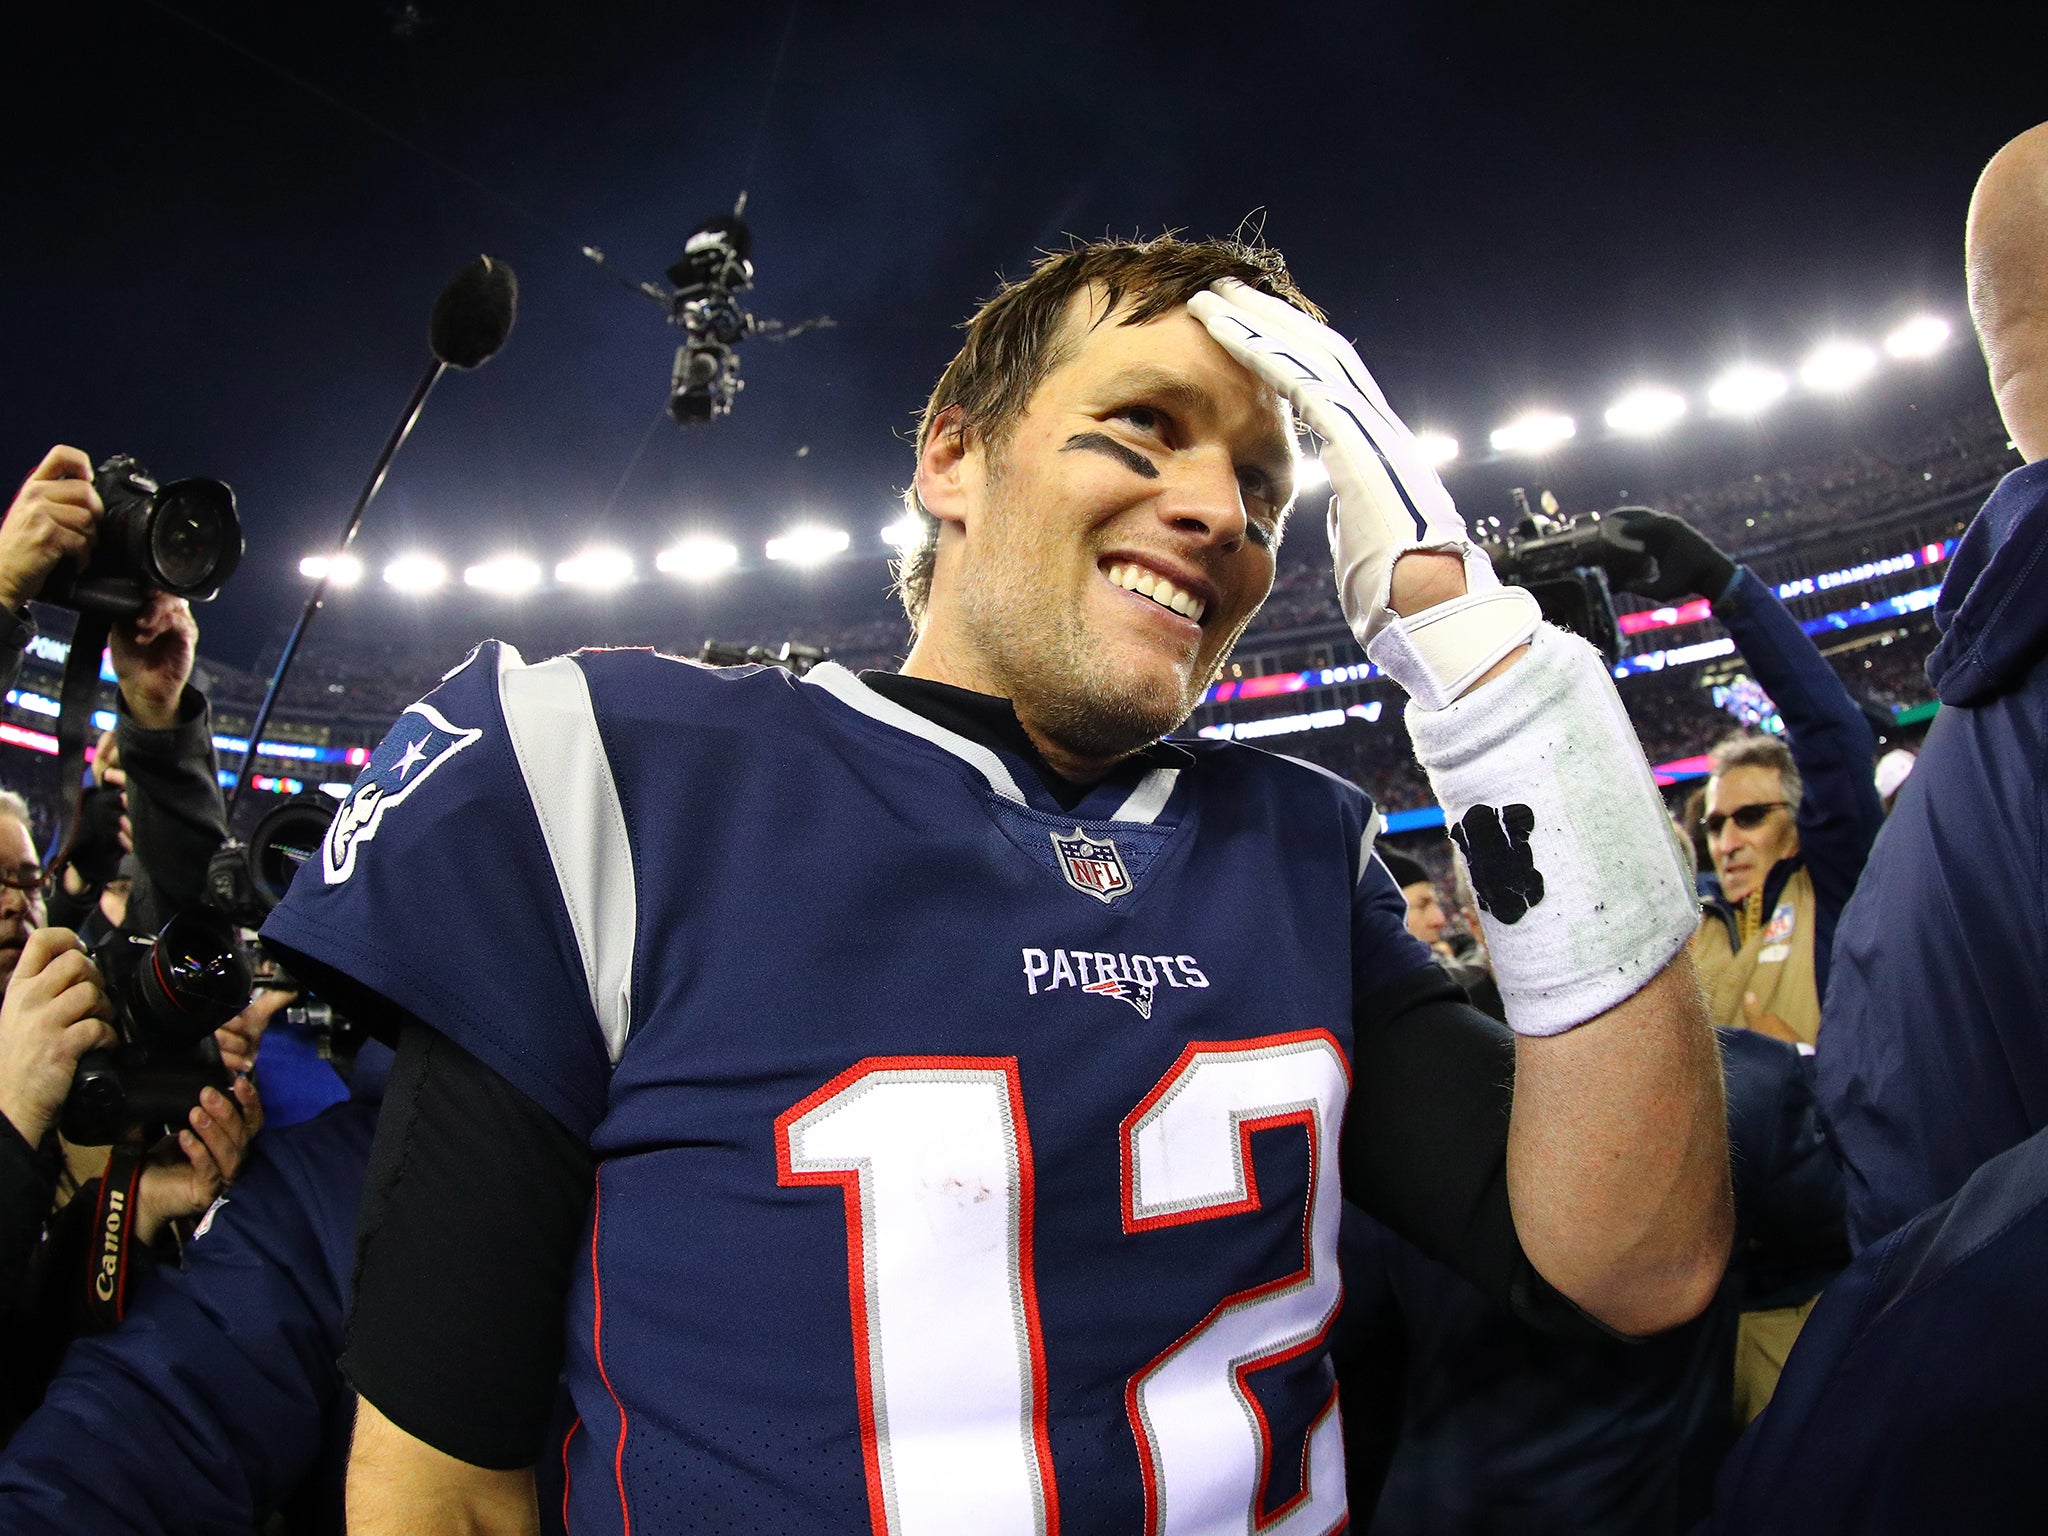 Brady will attempt to win his sixth Super Bowl this Sunday